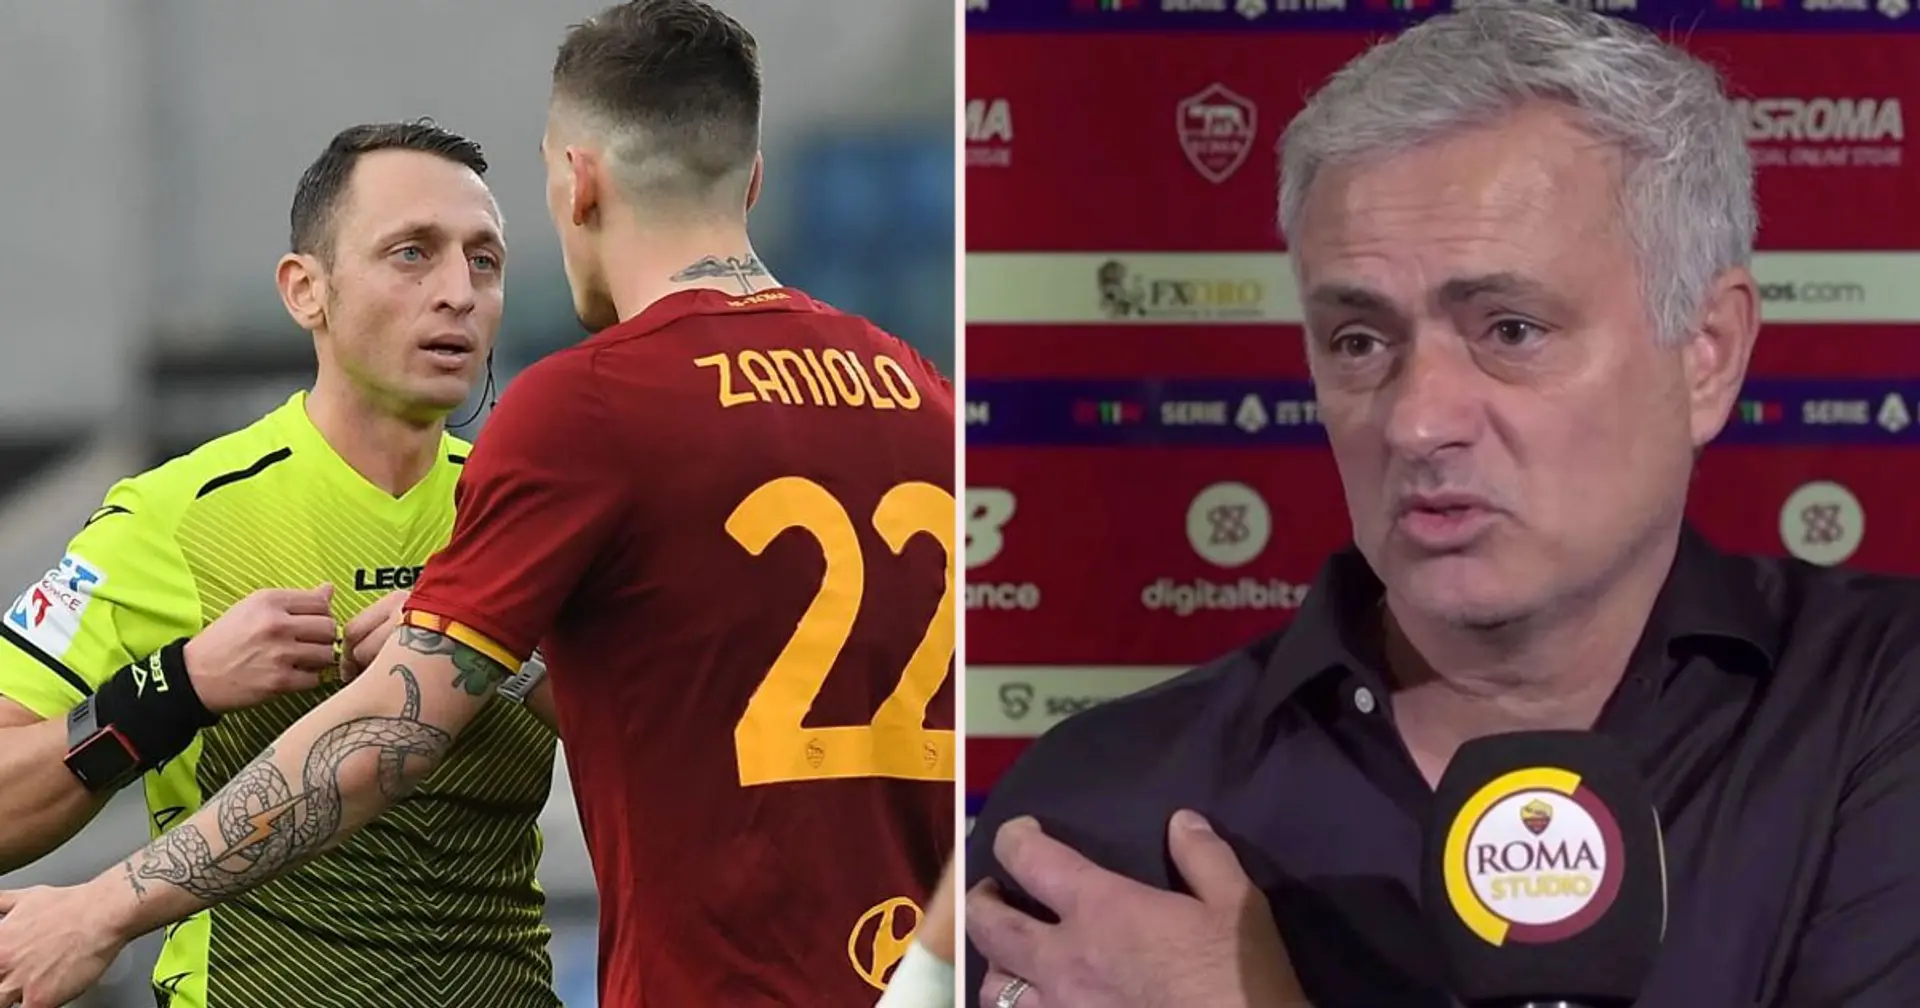 'This is no longer football’: Jose Mourinho rages at VAR after AS Roma’s draw to Genoa